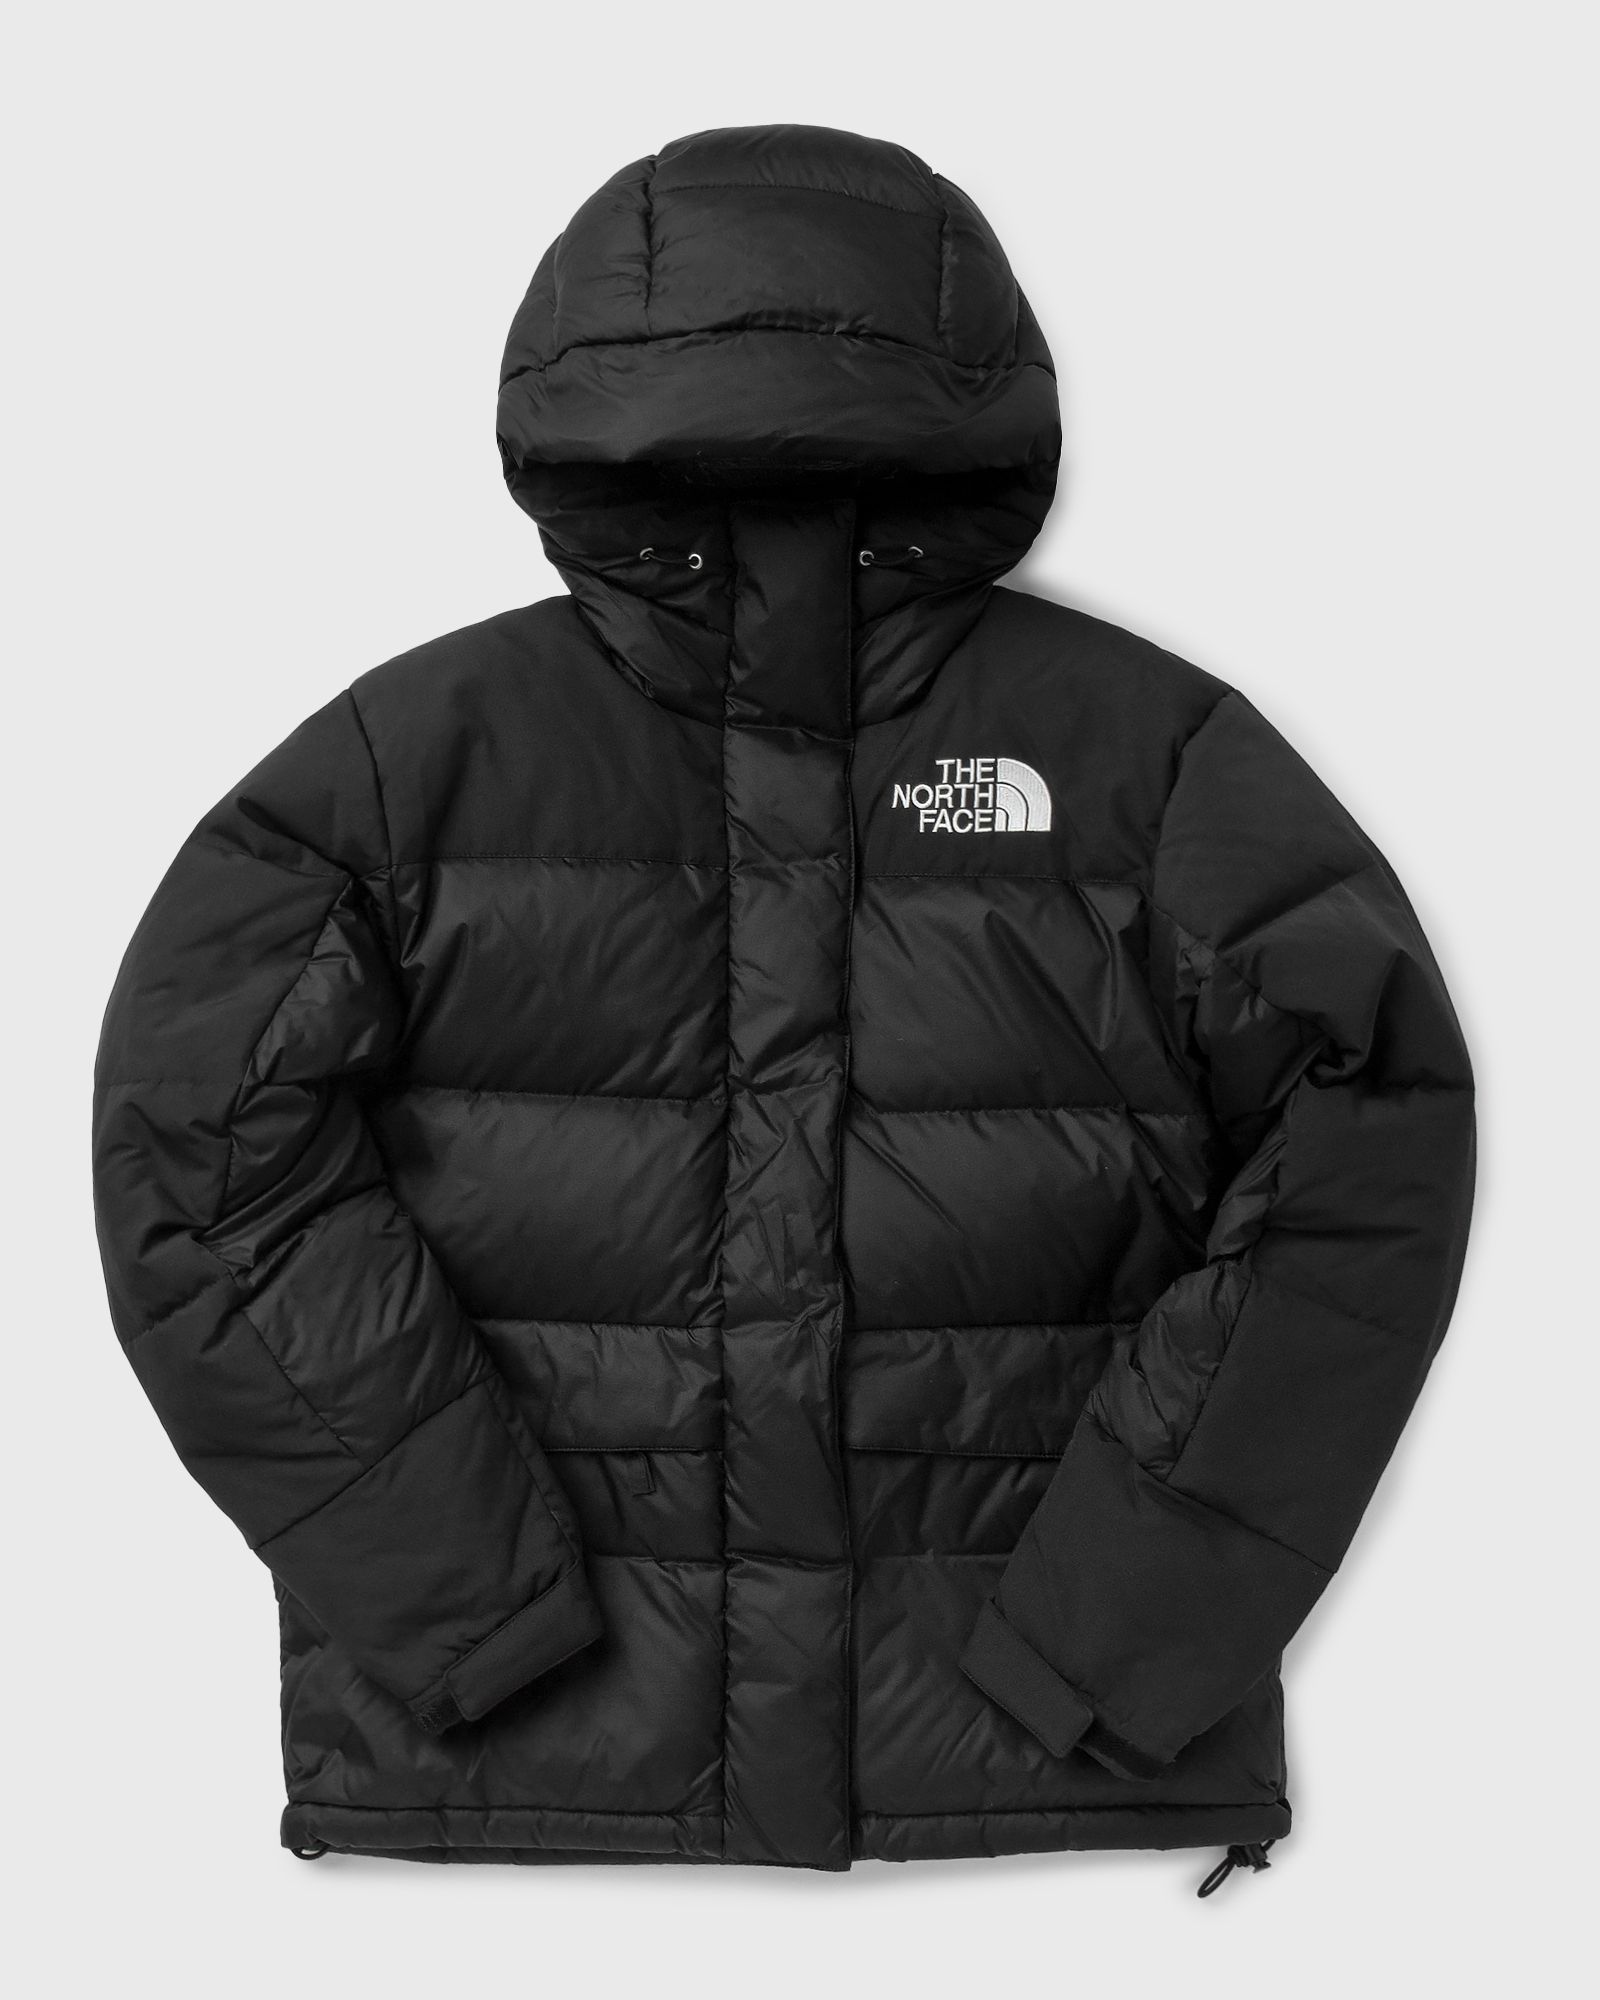 The North Face - wmns himalayan down parka women down & puffer jackets|parkas black in größe:m